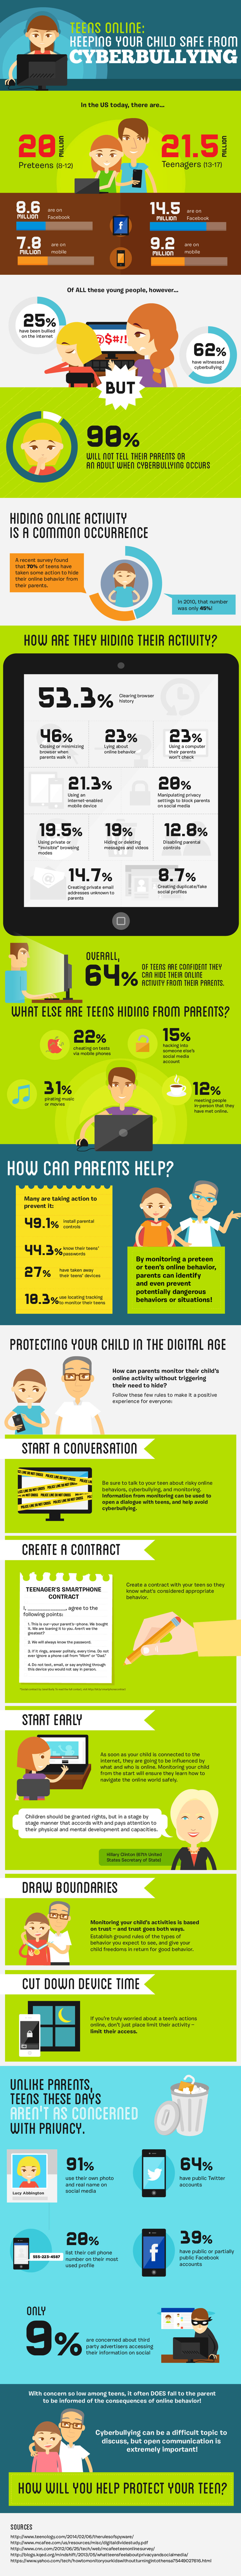 How to Keep Your Teen Safe from Cyberbullying - Parenting Infographic